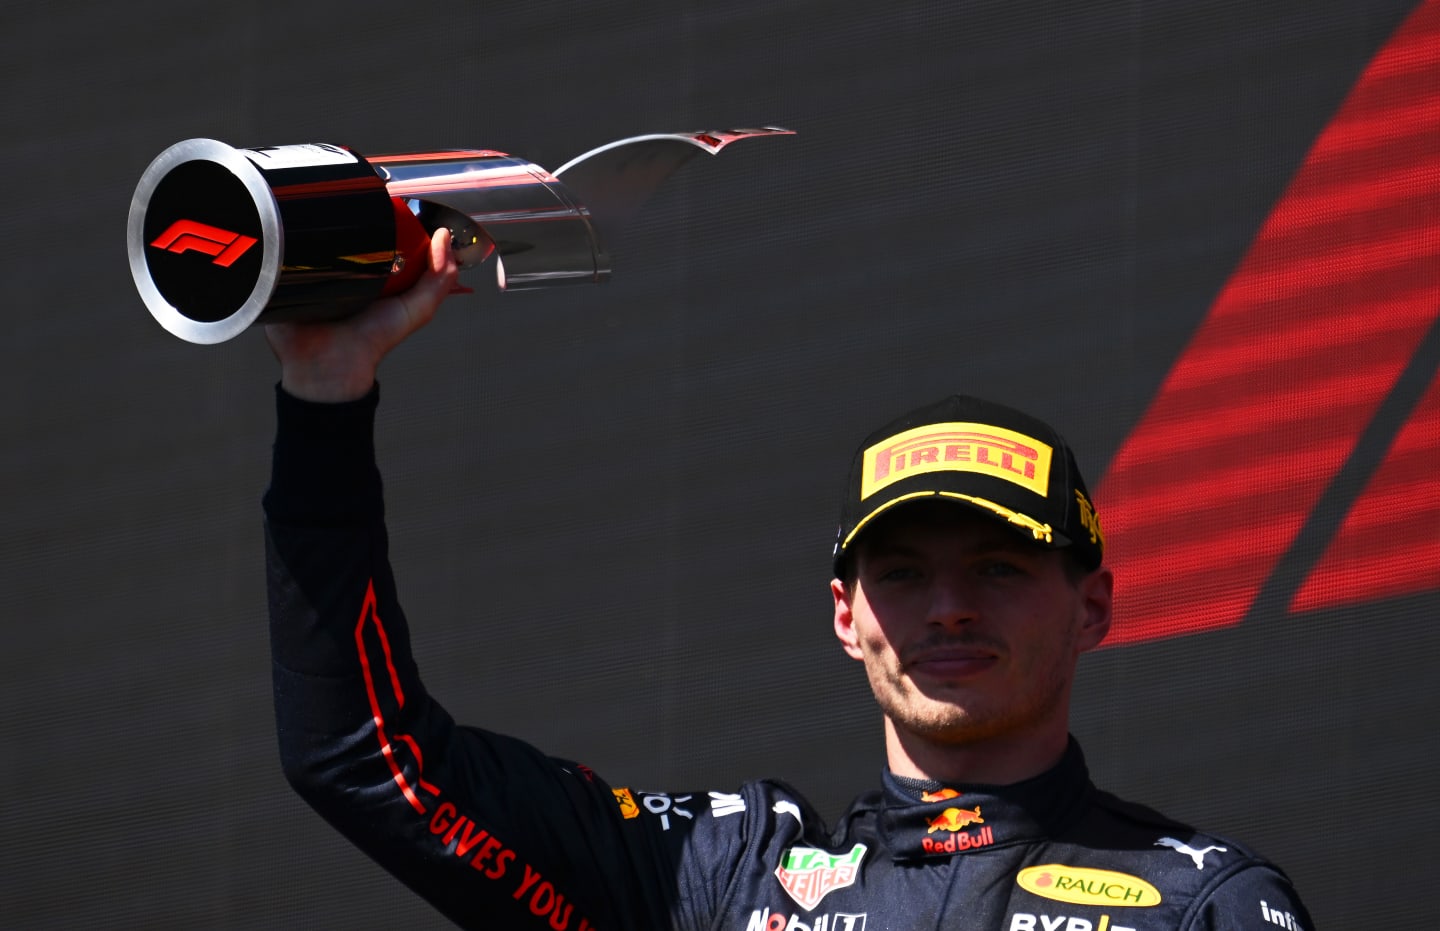 MONTREAL, QUEBEC - JUNE 19: Race winner Max Verstappen of the Netherlands and Oracle Red Bull Racing celebrates on the podium during the F1 Grand Prix of Canada at Circuit Gilles Villeneuve on June 19, 2022 in Montreal, Quebec. (Photo by Clive Mason/Getty Images)